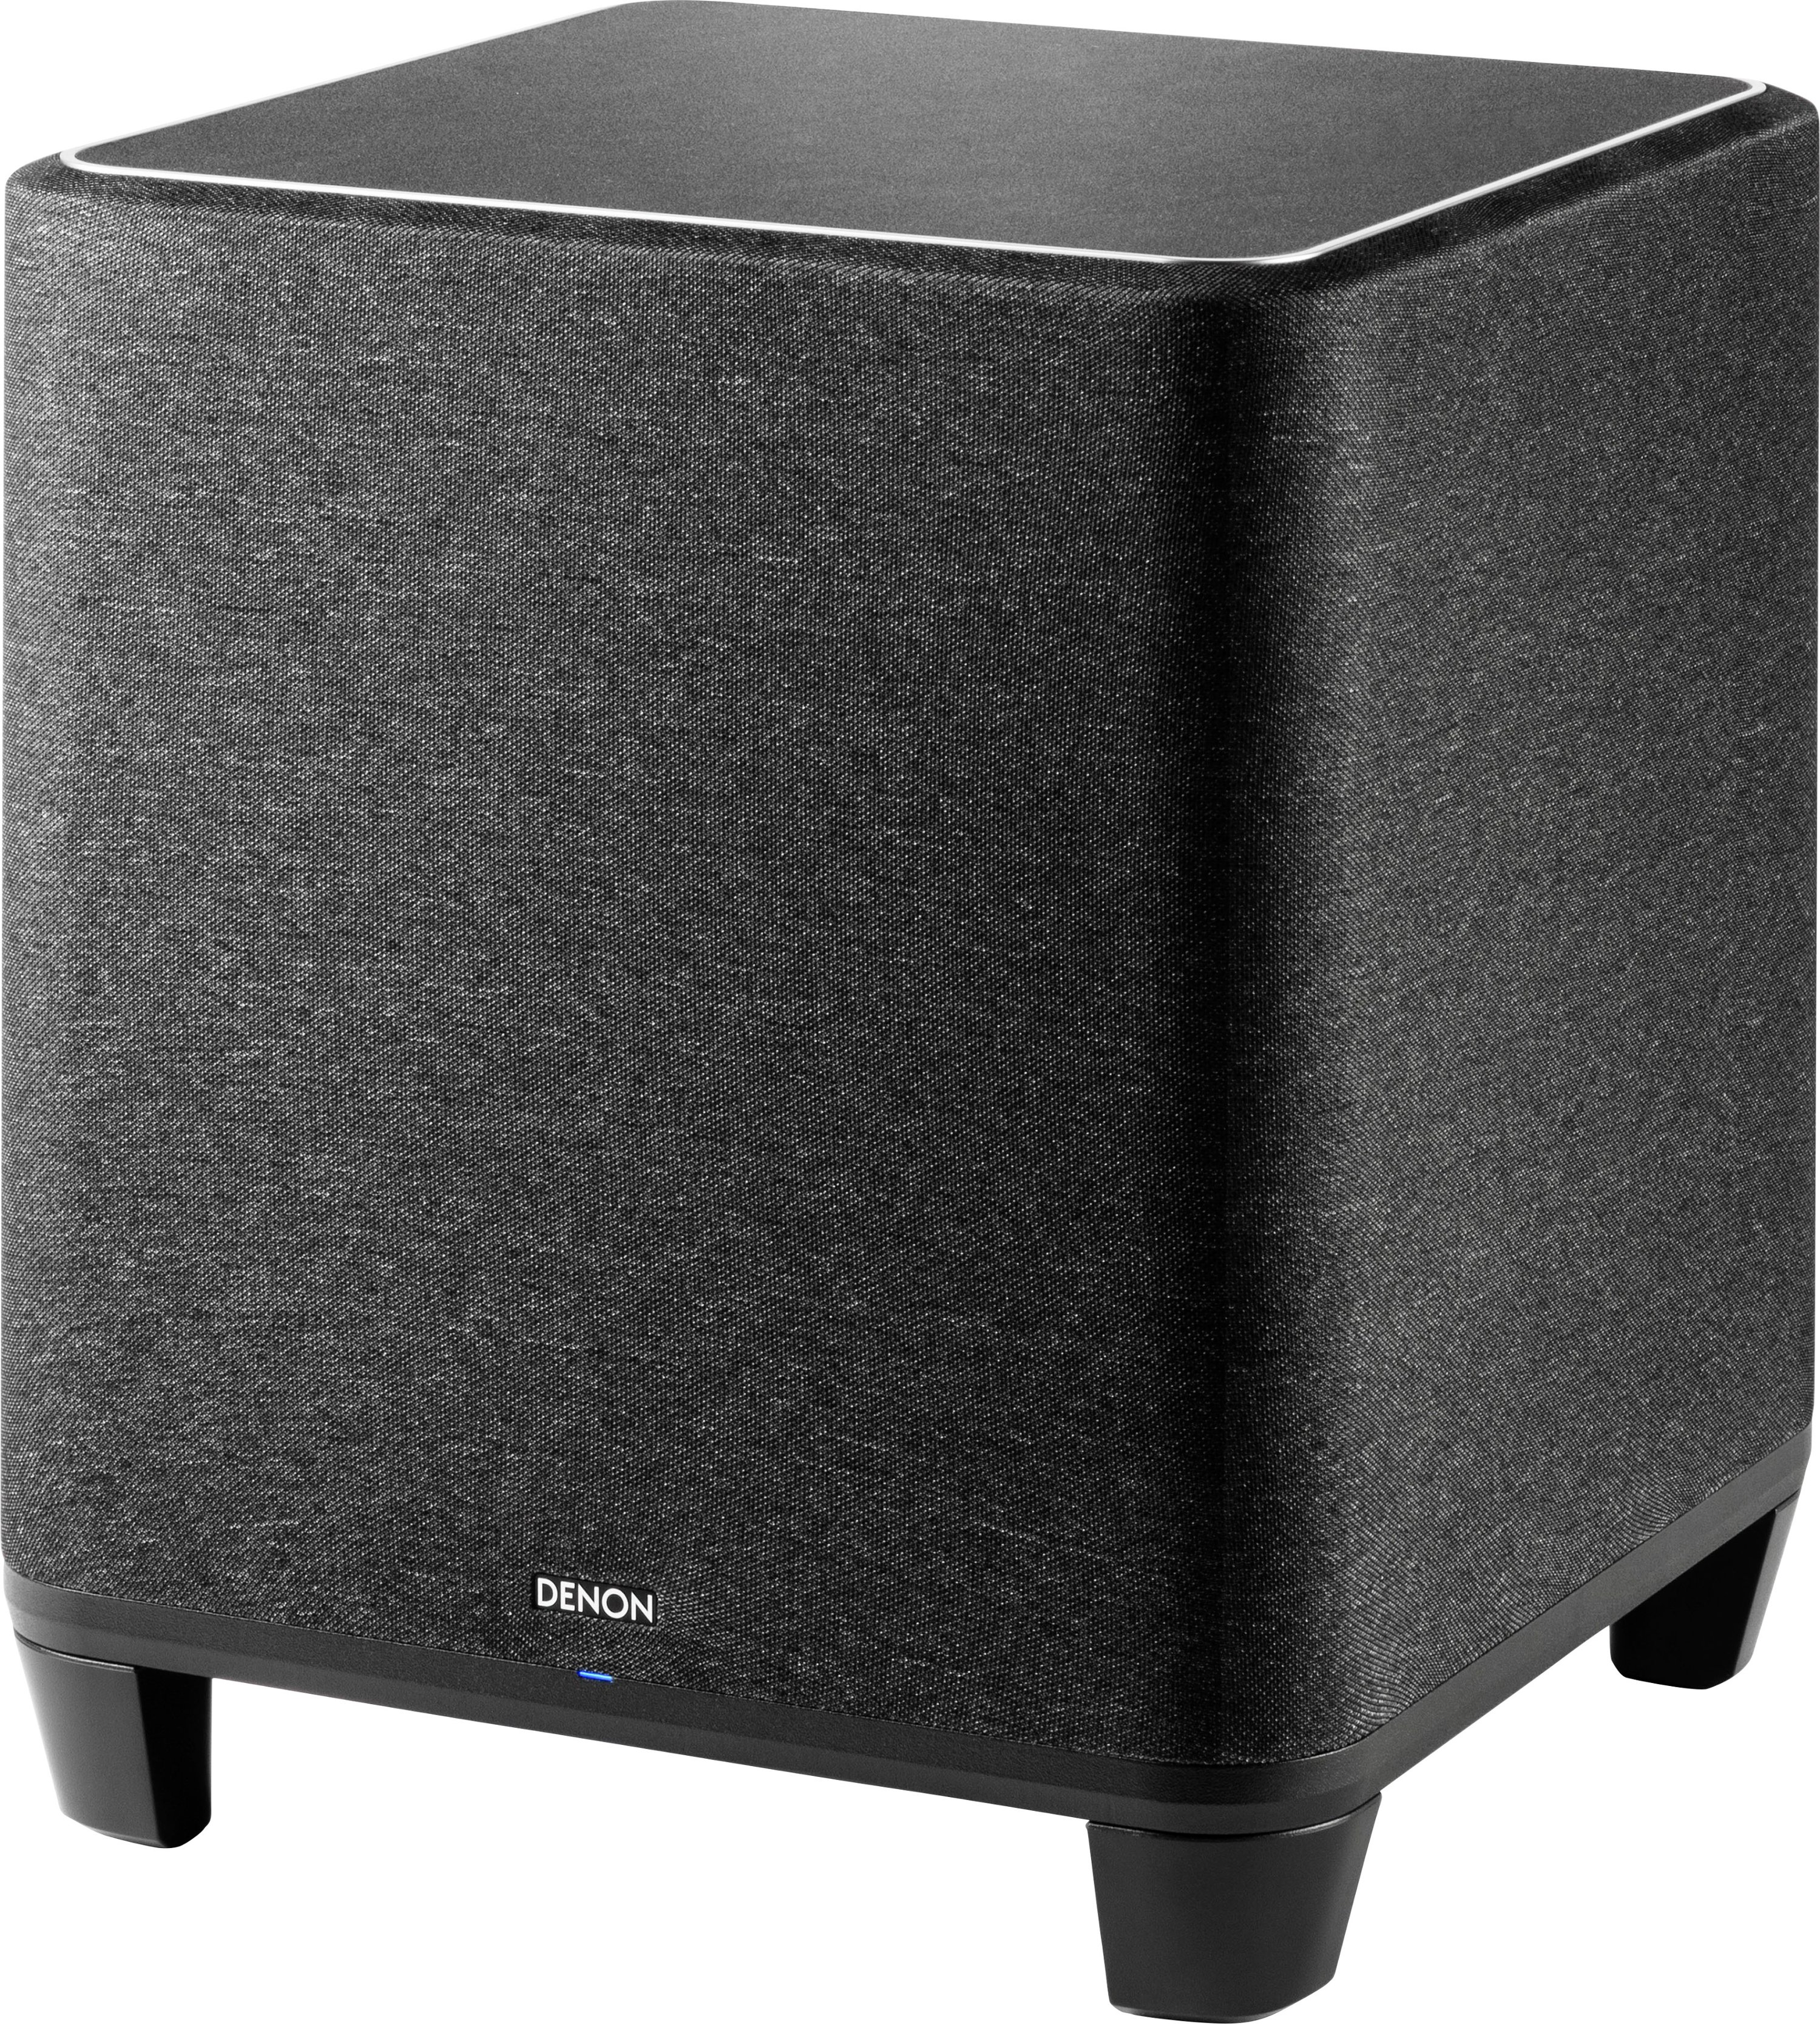 HEOS Best Home - Built-in DENONHOMESUB Wireless Black Subwoofer Buy with Denon